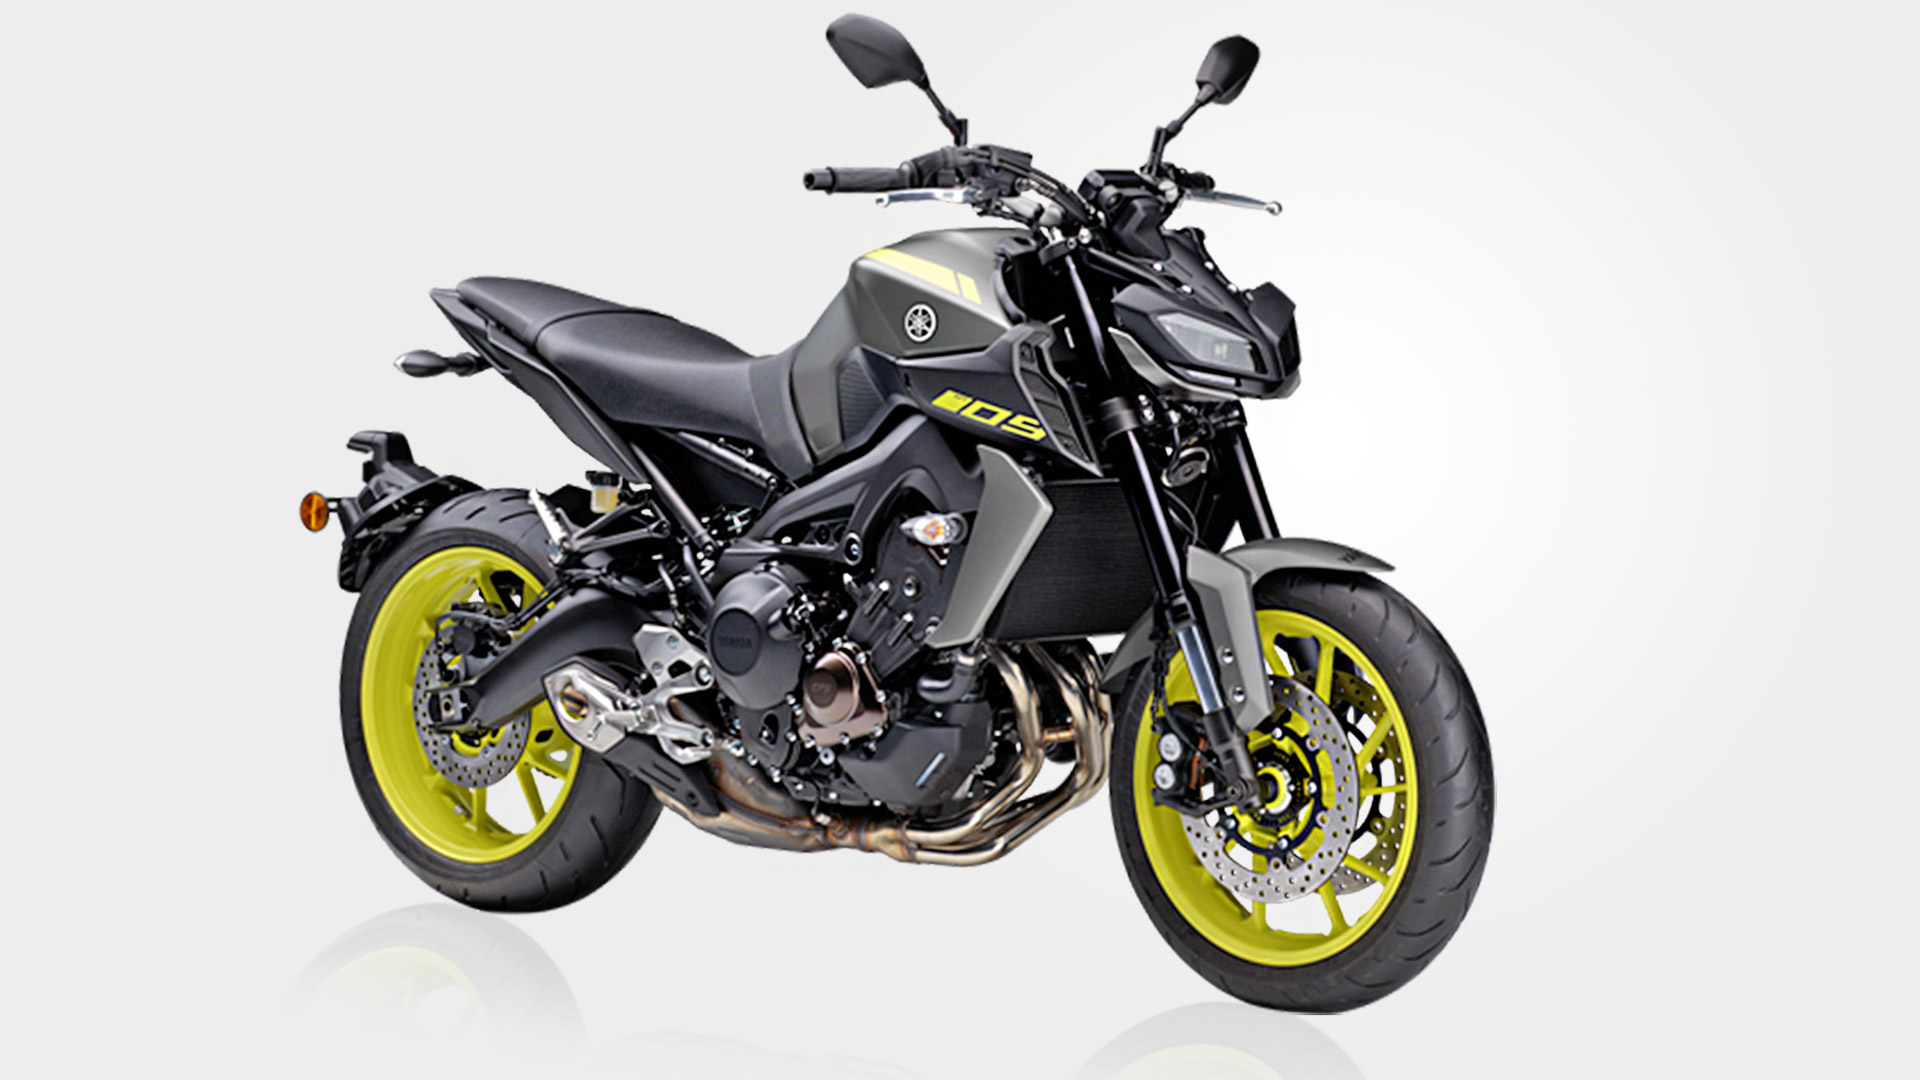 Yamaha MT-09 2018 - Price, Mileage, Reviews, Specification, Gallery ...